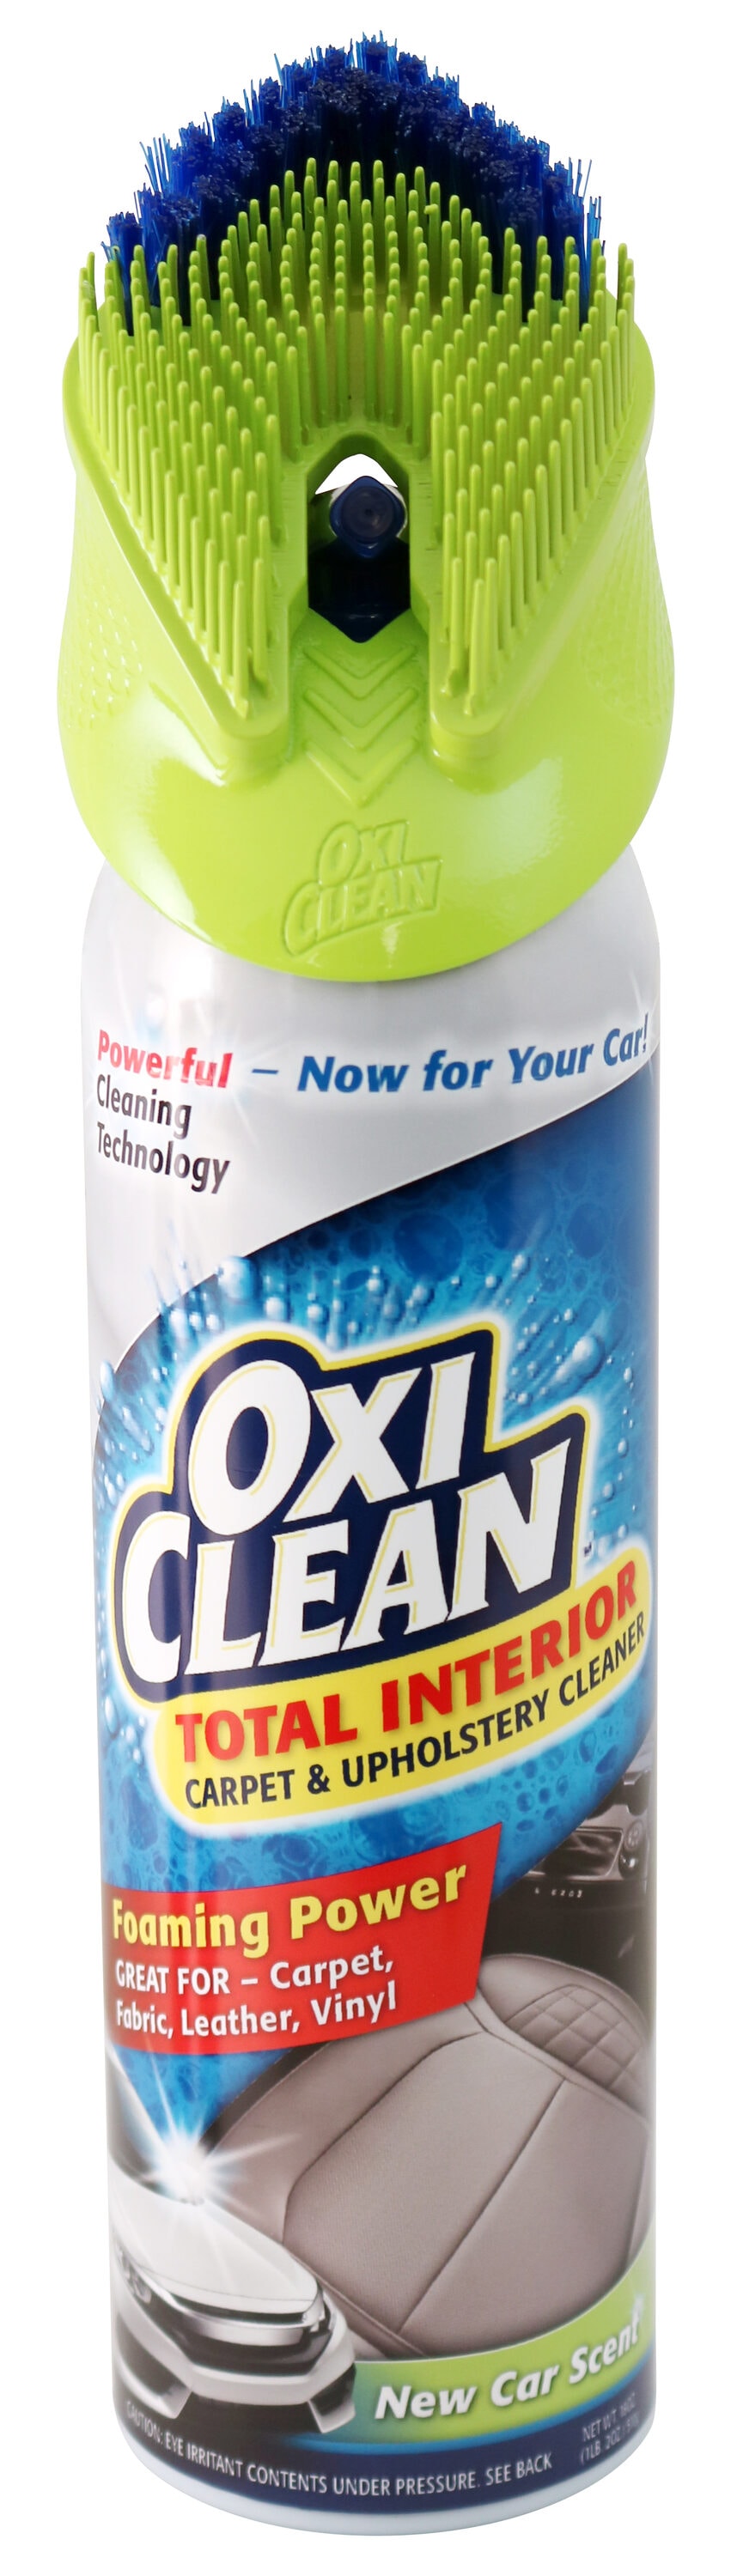 Hopkins Oxi-Clean Carpet And Upholstery Cleaner 57200OC